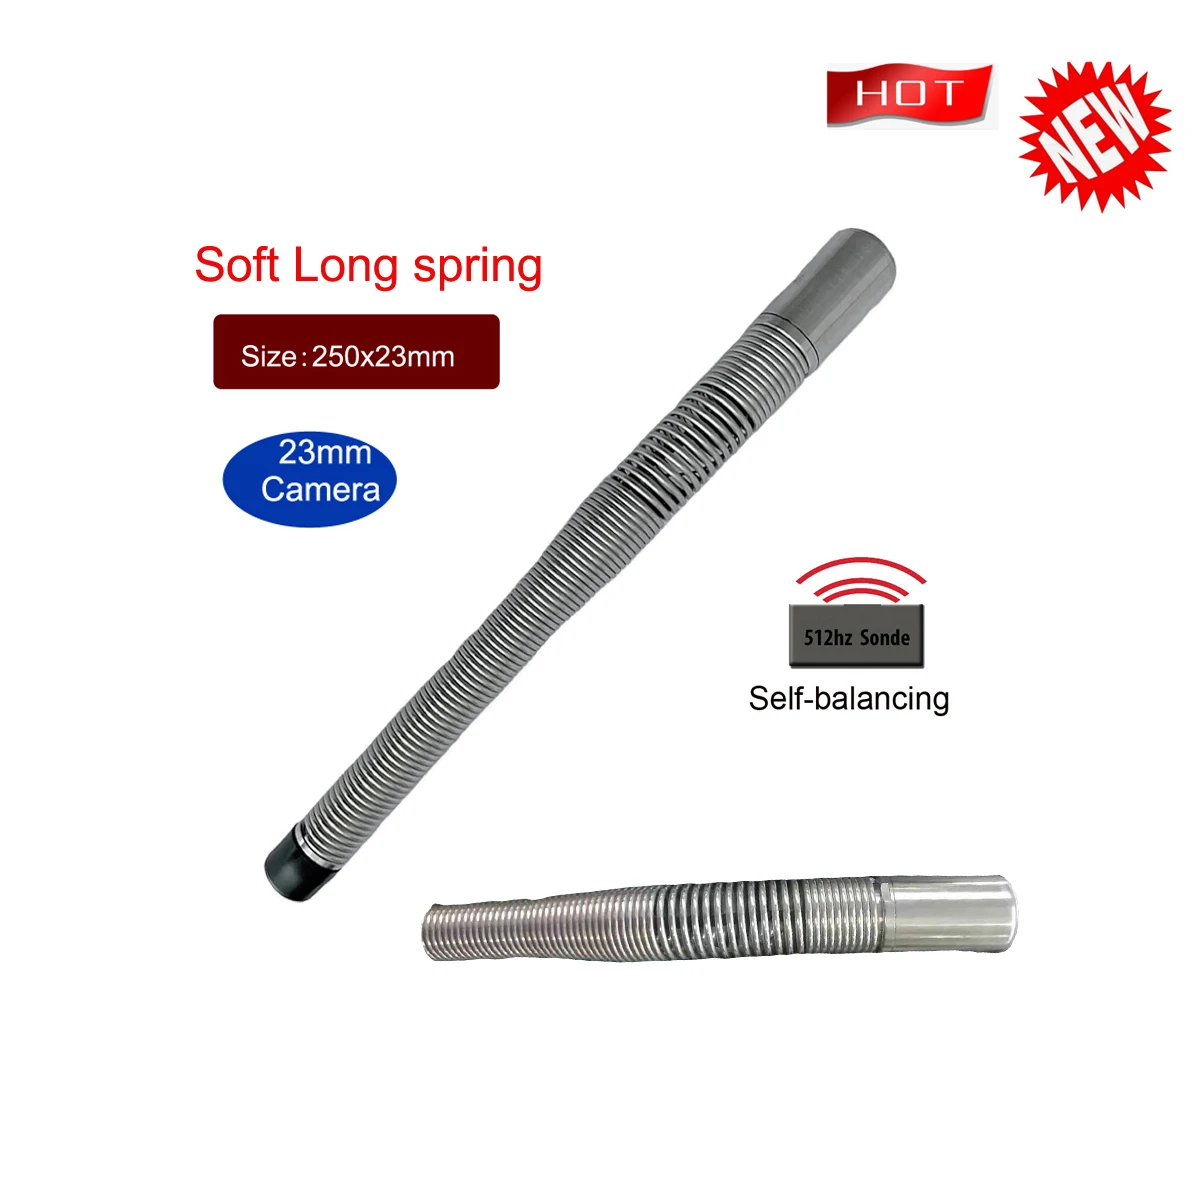 Soft Long spring 512hz Transmitter Self Leveling Balance 23mm Camera Head For Sewer Pipe Inspection camera w/12 LEDs spring line connecting cable gx12 4 sewer pipe inspection endoscope camera car video truck trailer aviation rear view wire